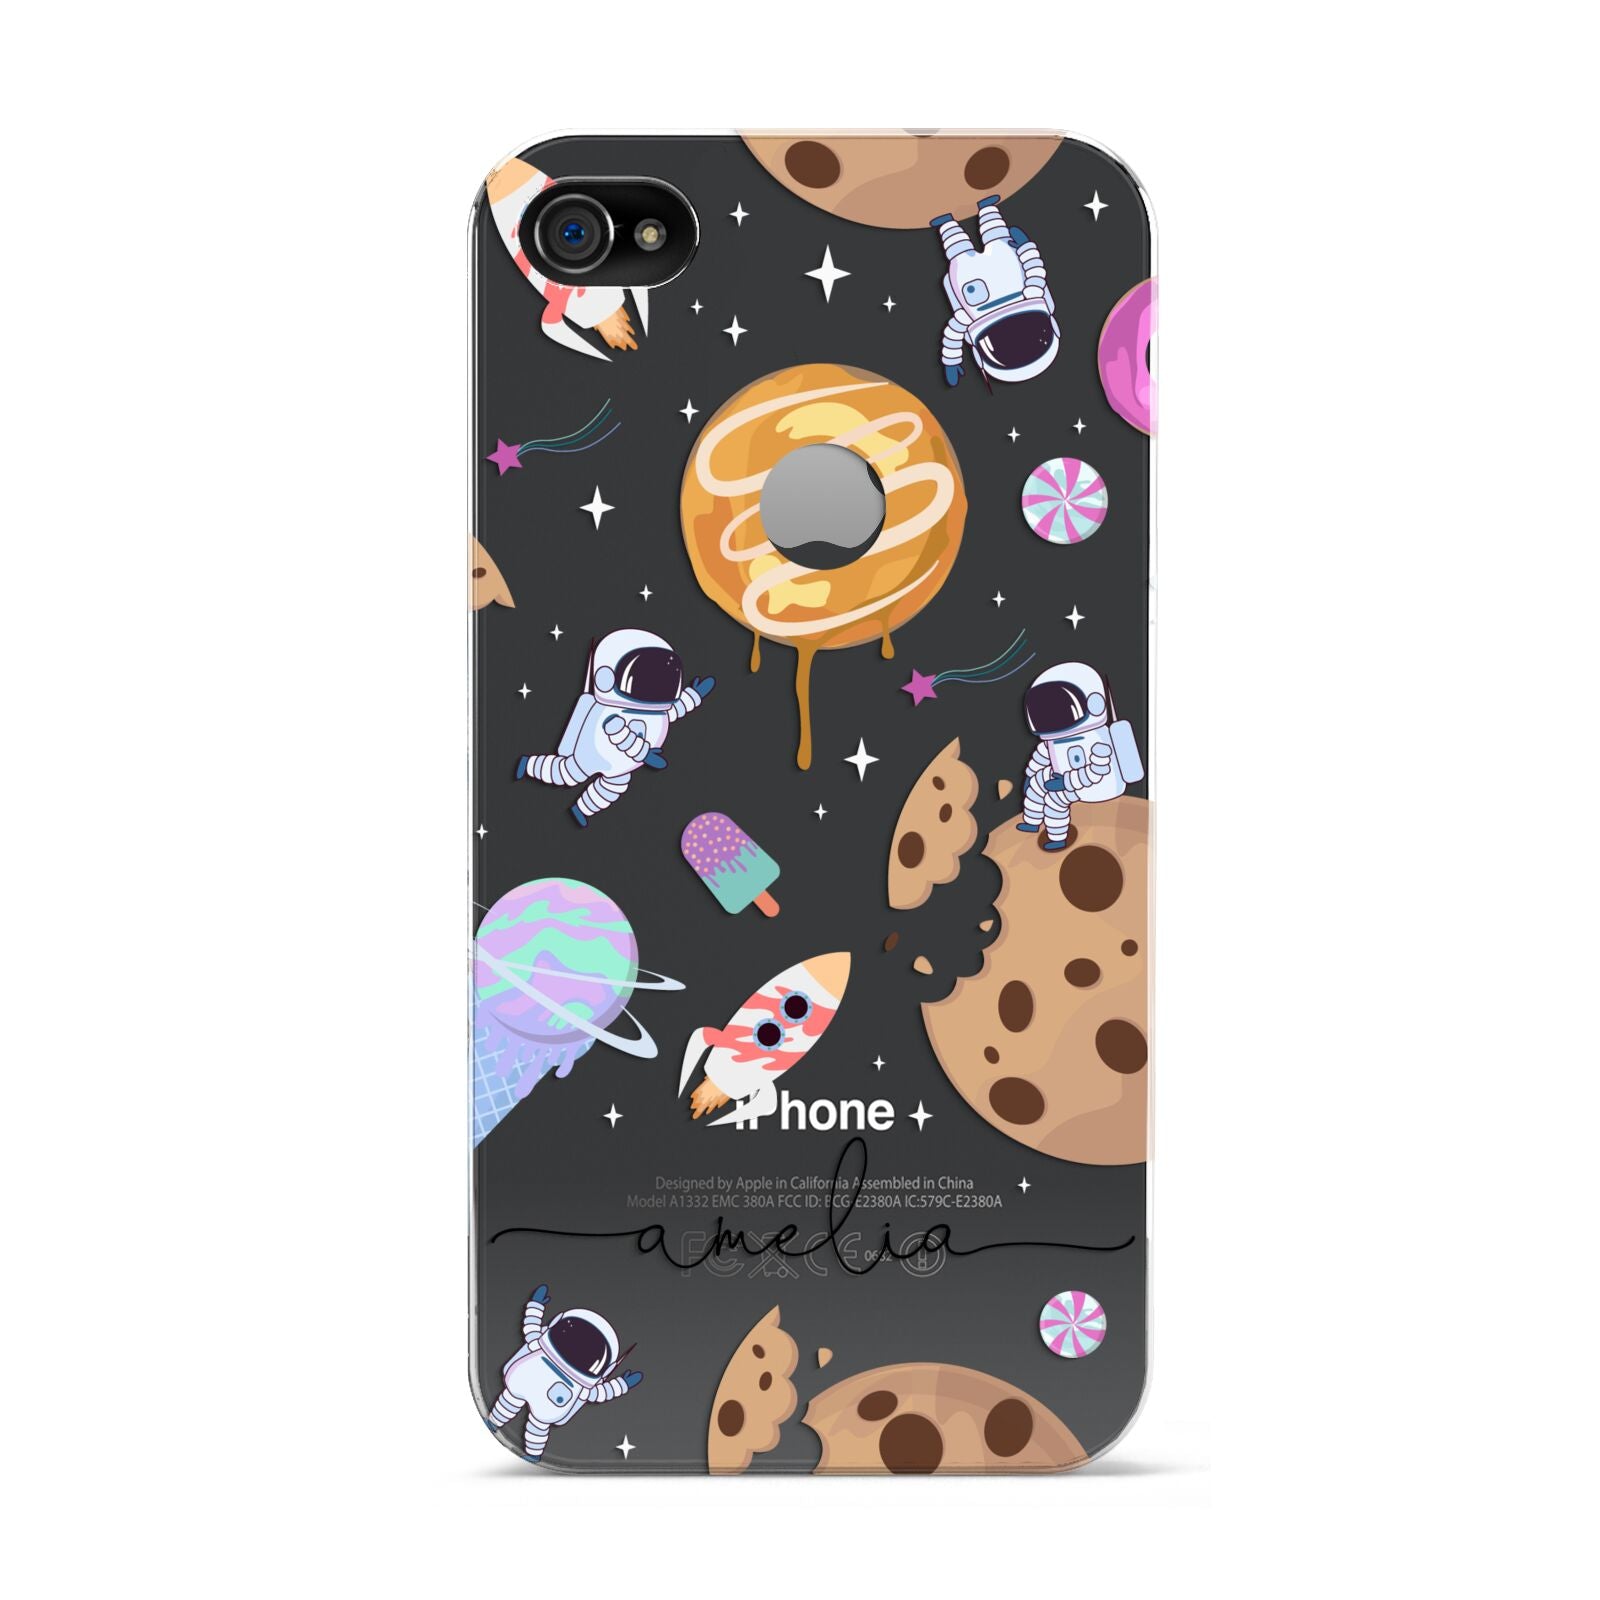 Candyland Galaxy Clear Personalised Apple iPhone 4s Case